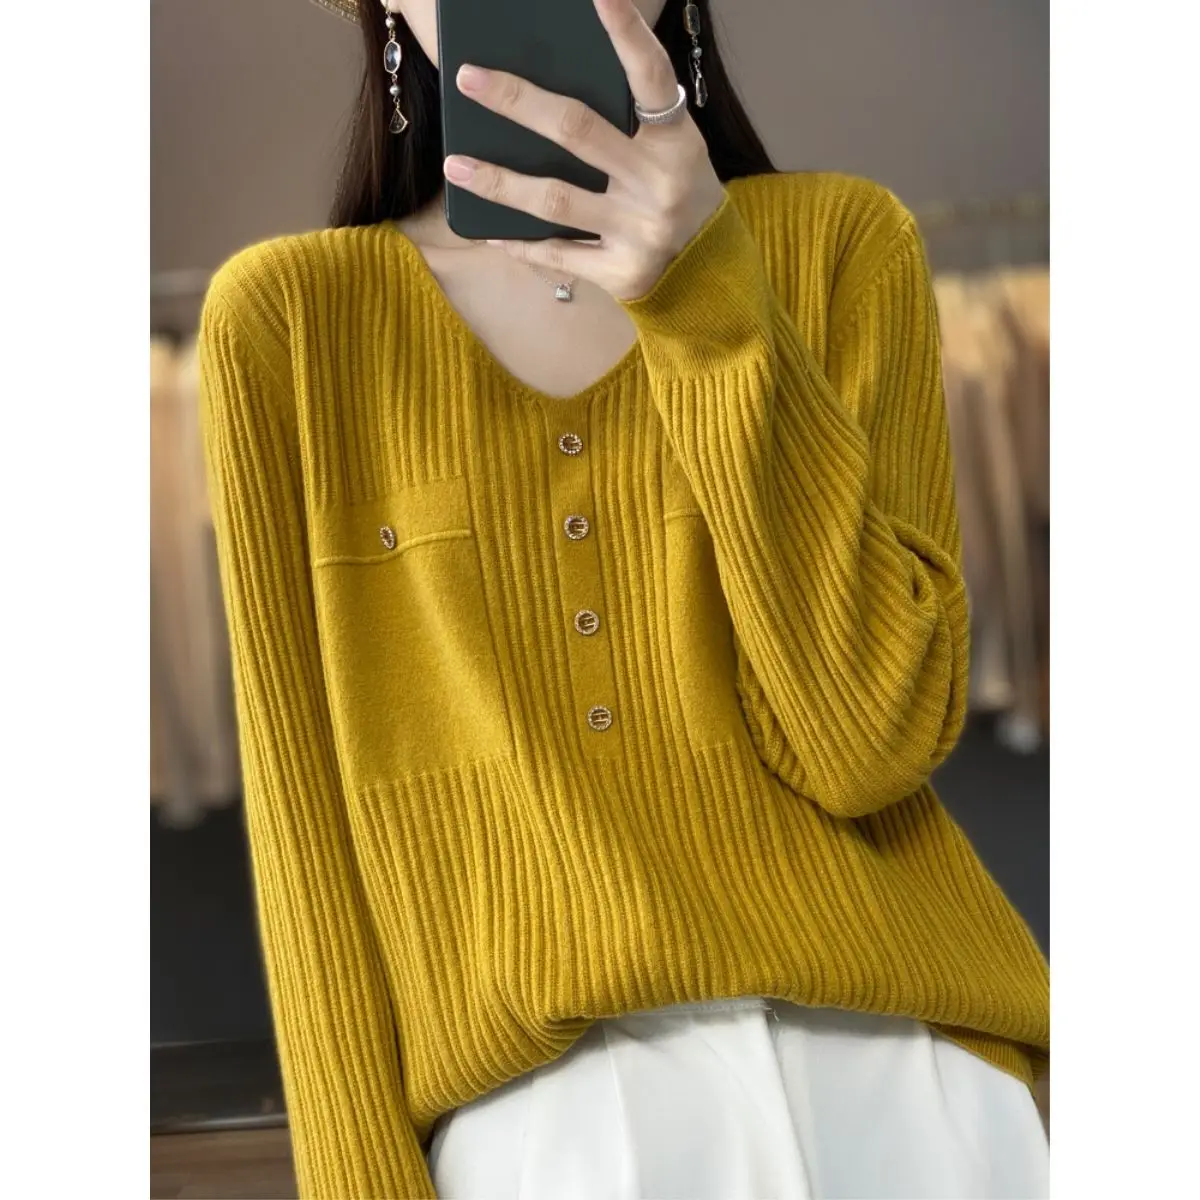 8ST8Women Sweater and Pullovers Fall Winter New Skinny Jumpers V neck Basic Warm Sweater Pullovers Warm